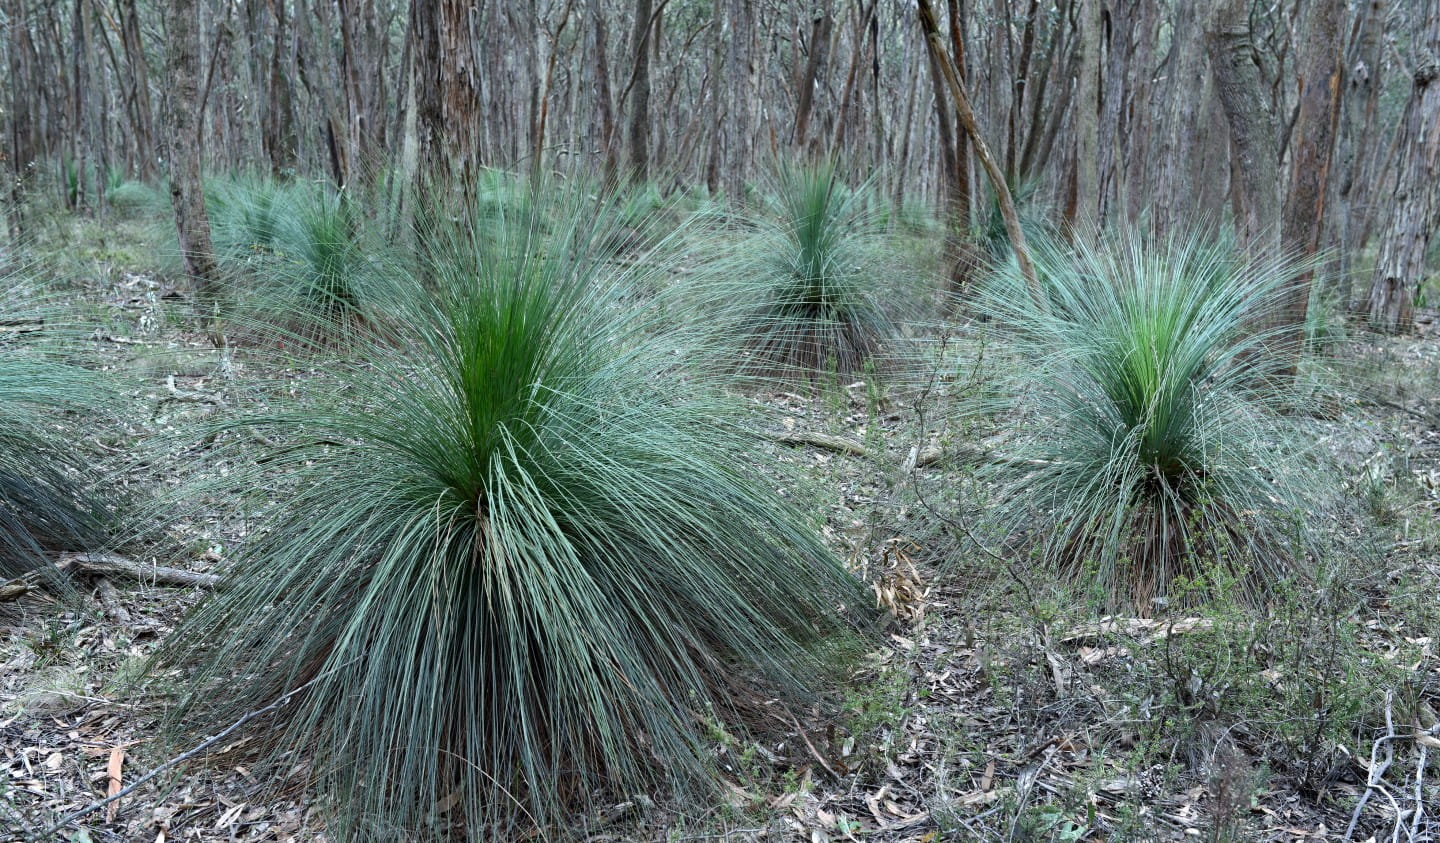 Grass trees like these in Woowookurang Regional Park provide colour and interesting textures